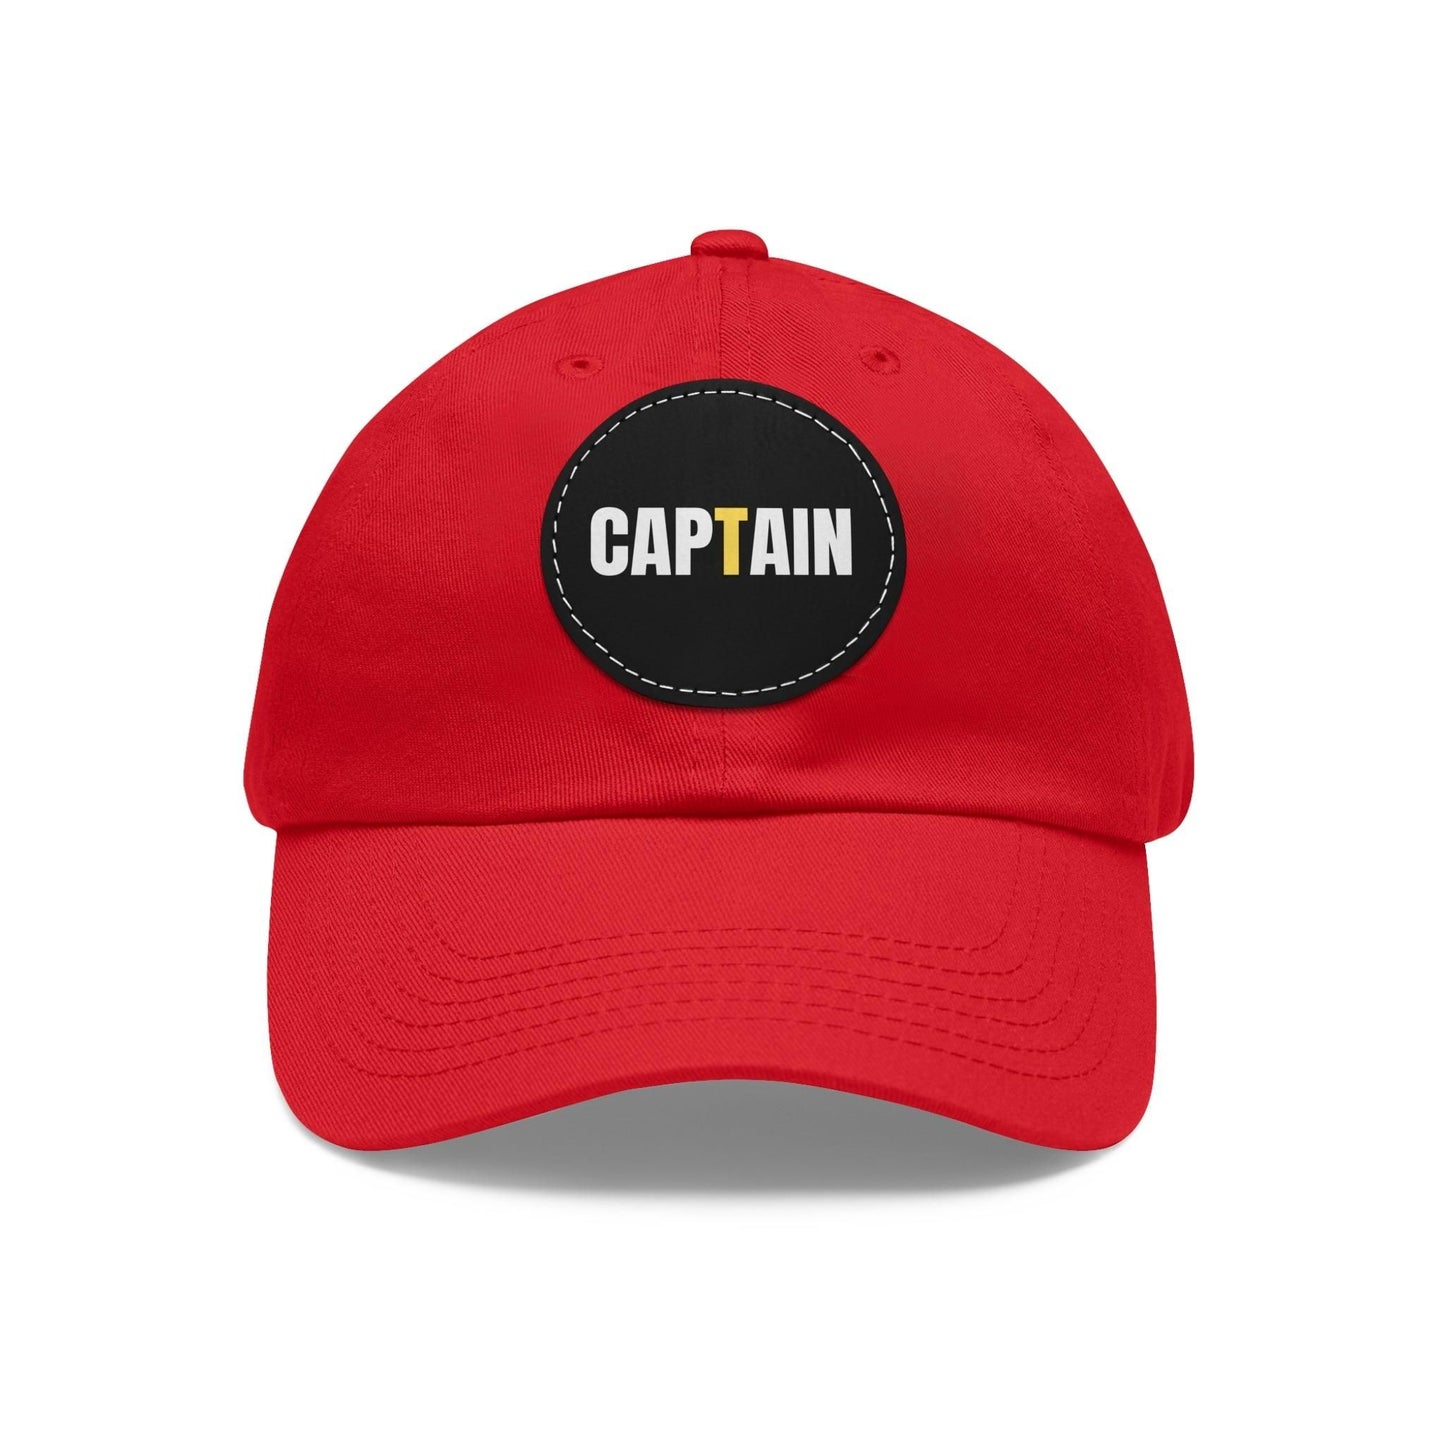 Captain Baseball Hat with Leather Patch Cap Red / Black patch Circle One size